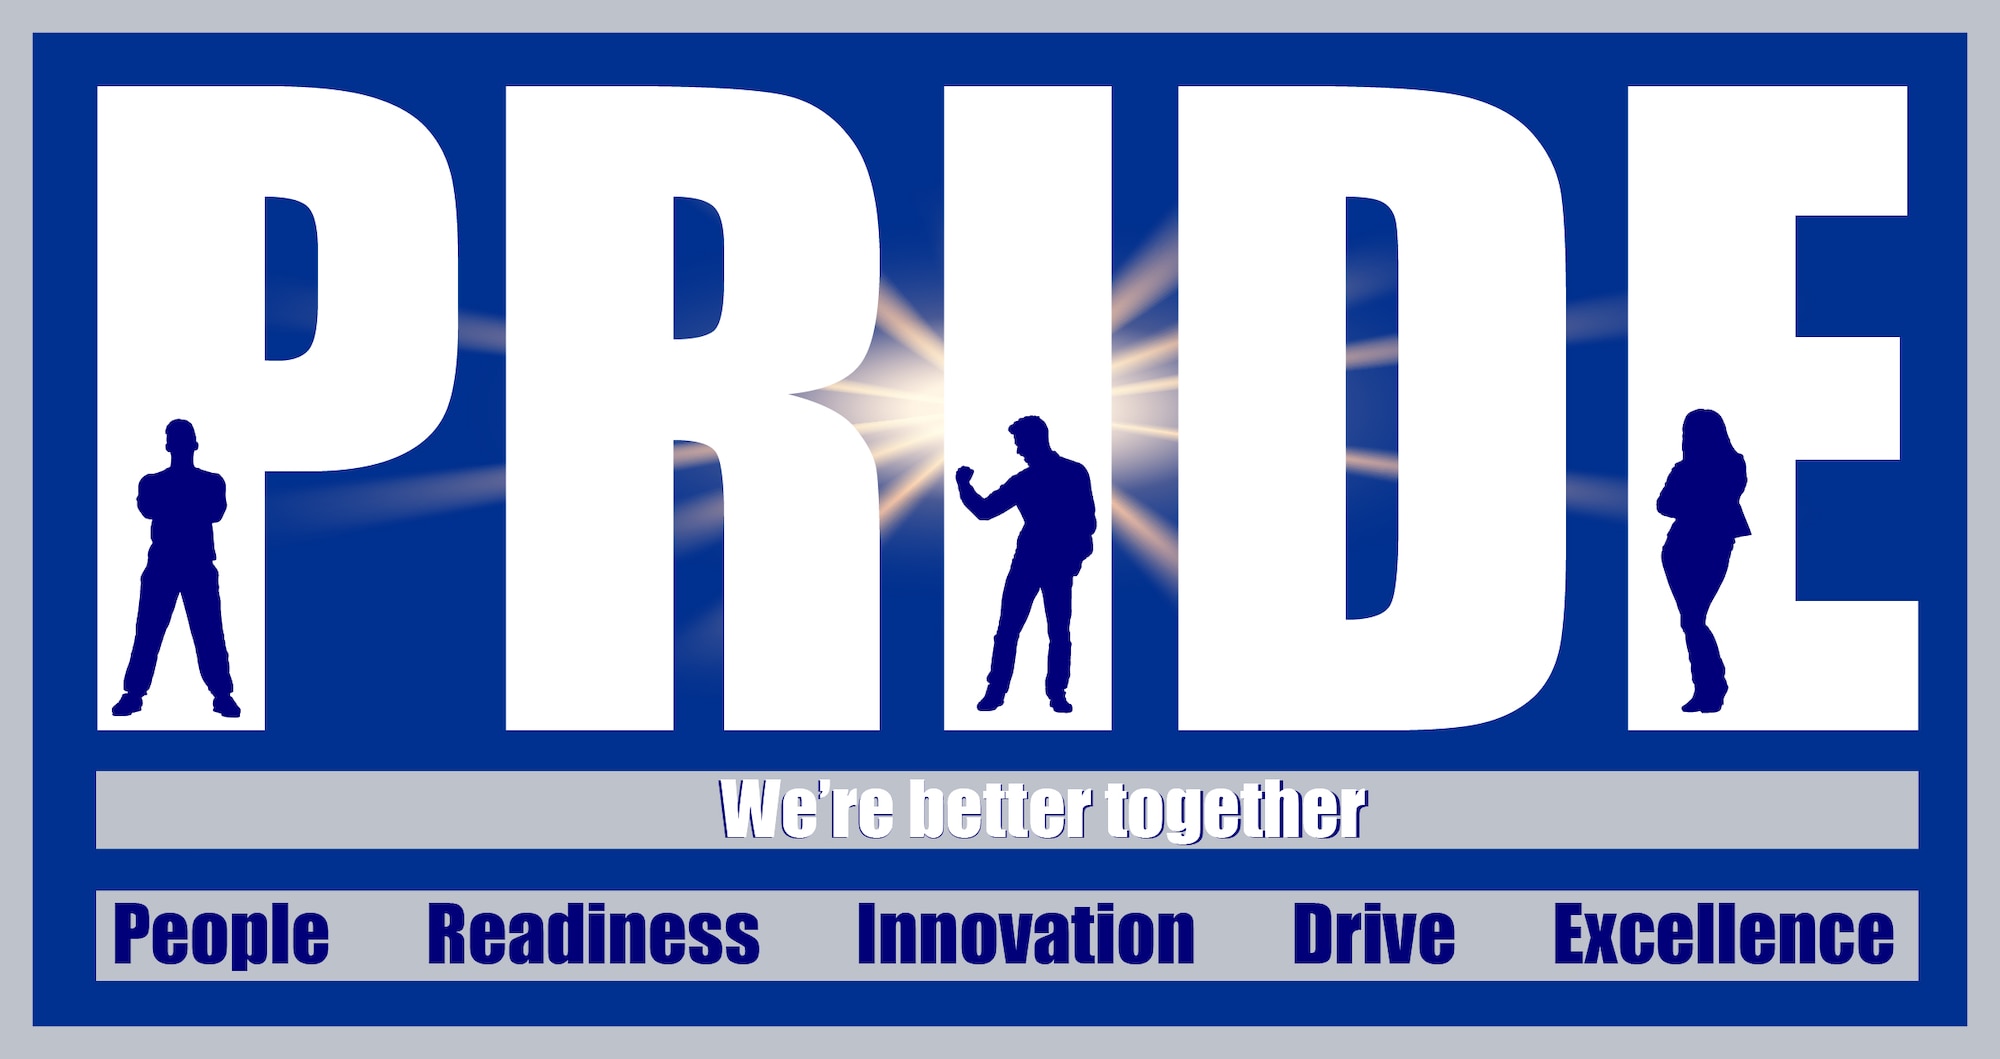 Graphic shows the word pride, with silhouettes of people imposed on the letters. There is a starburst behind the word PRIDE. Underneath PRIDE is the motto: "We're better together." At the bottom of the graphic, the words appear: People, Readiness, Innovation, Drive and Excellence.